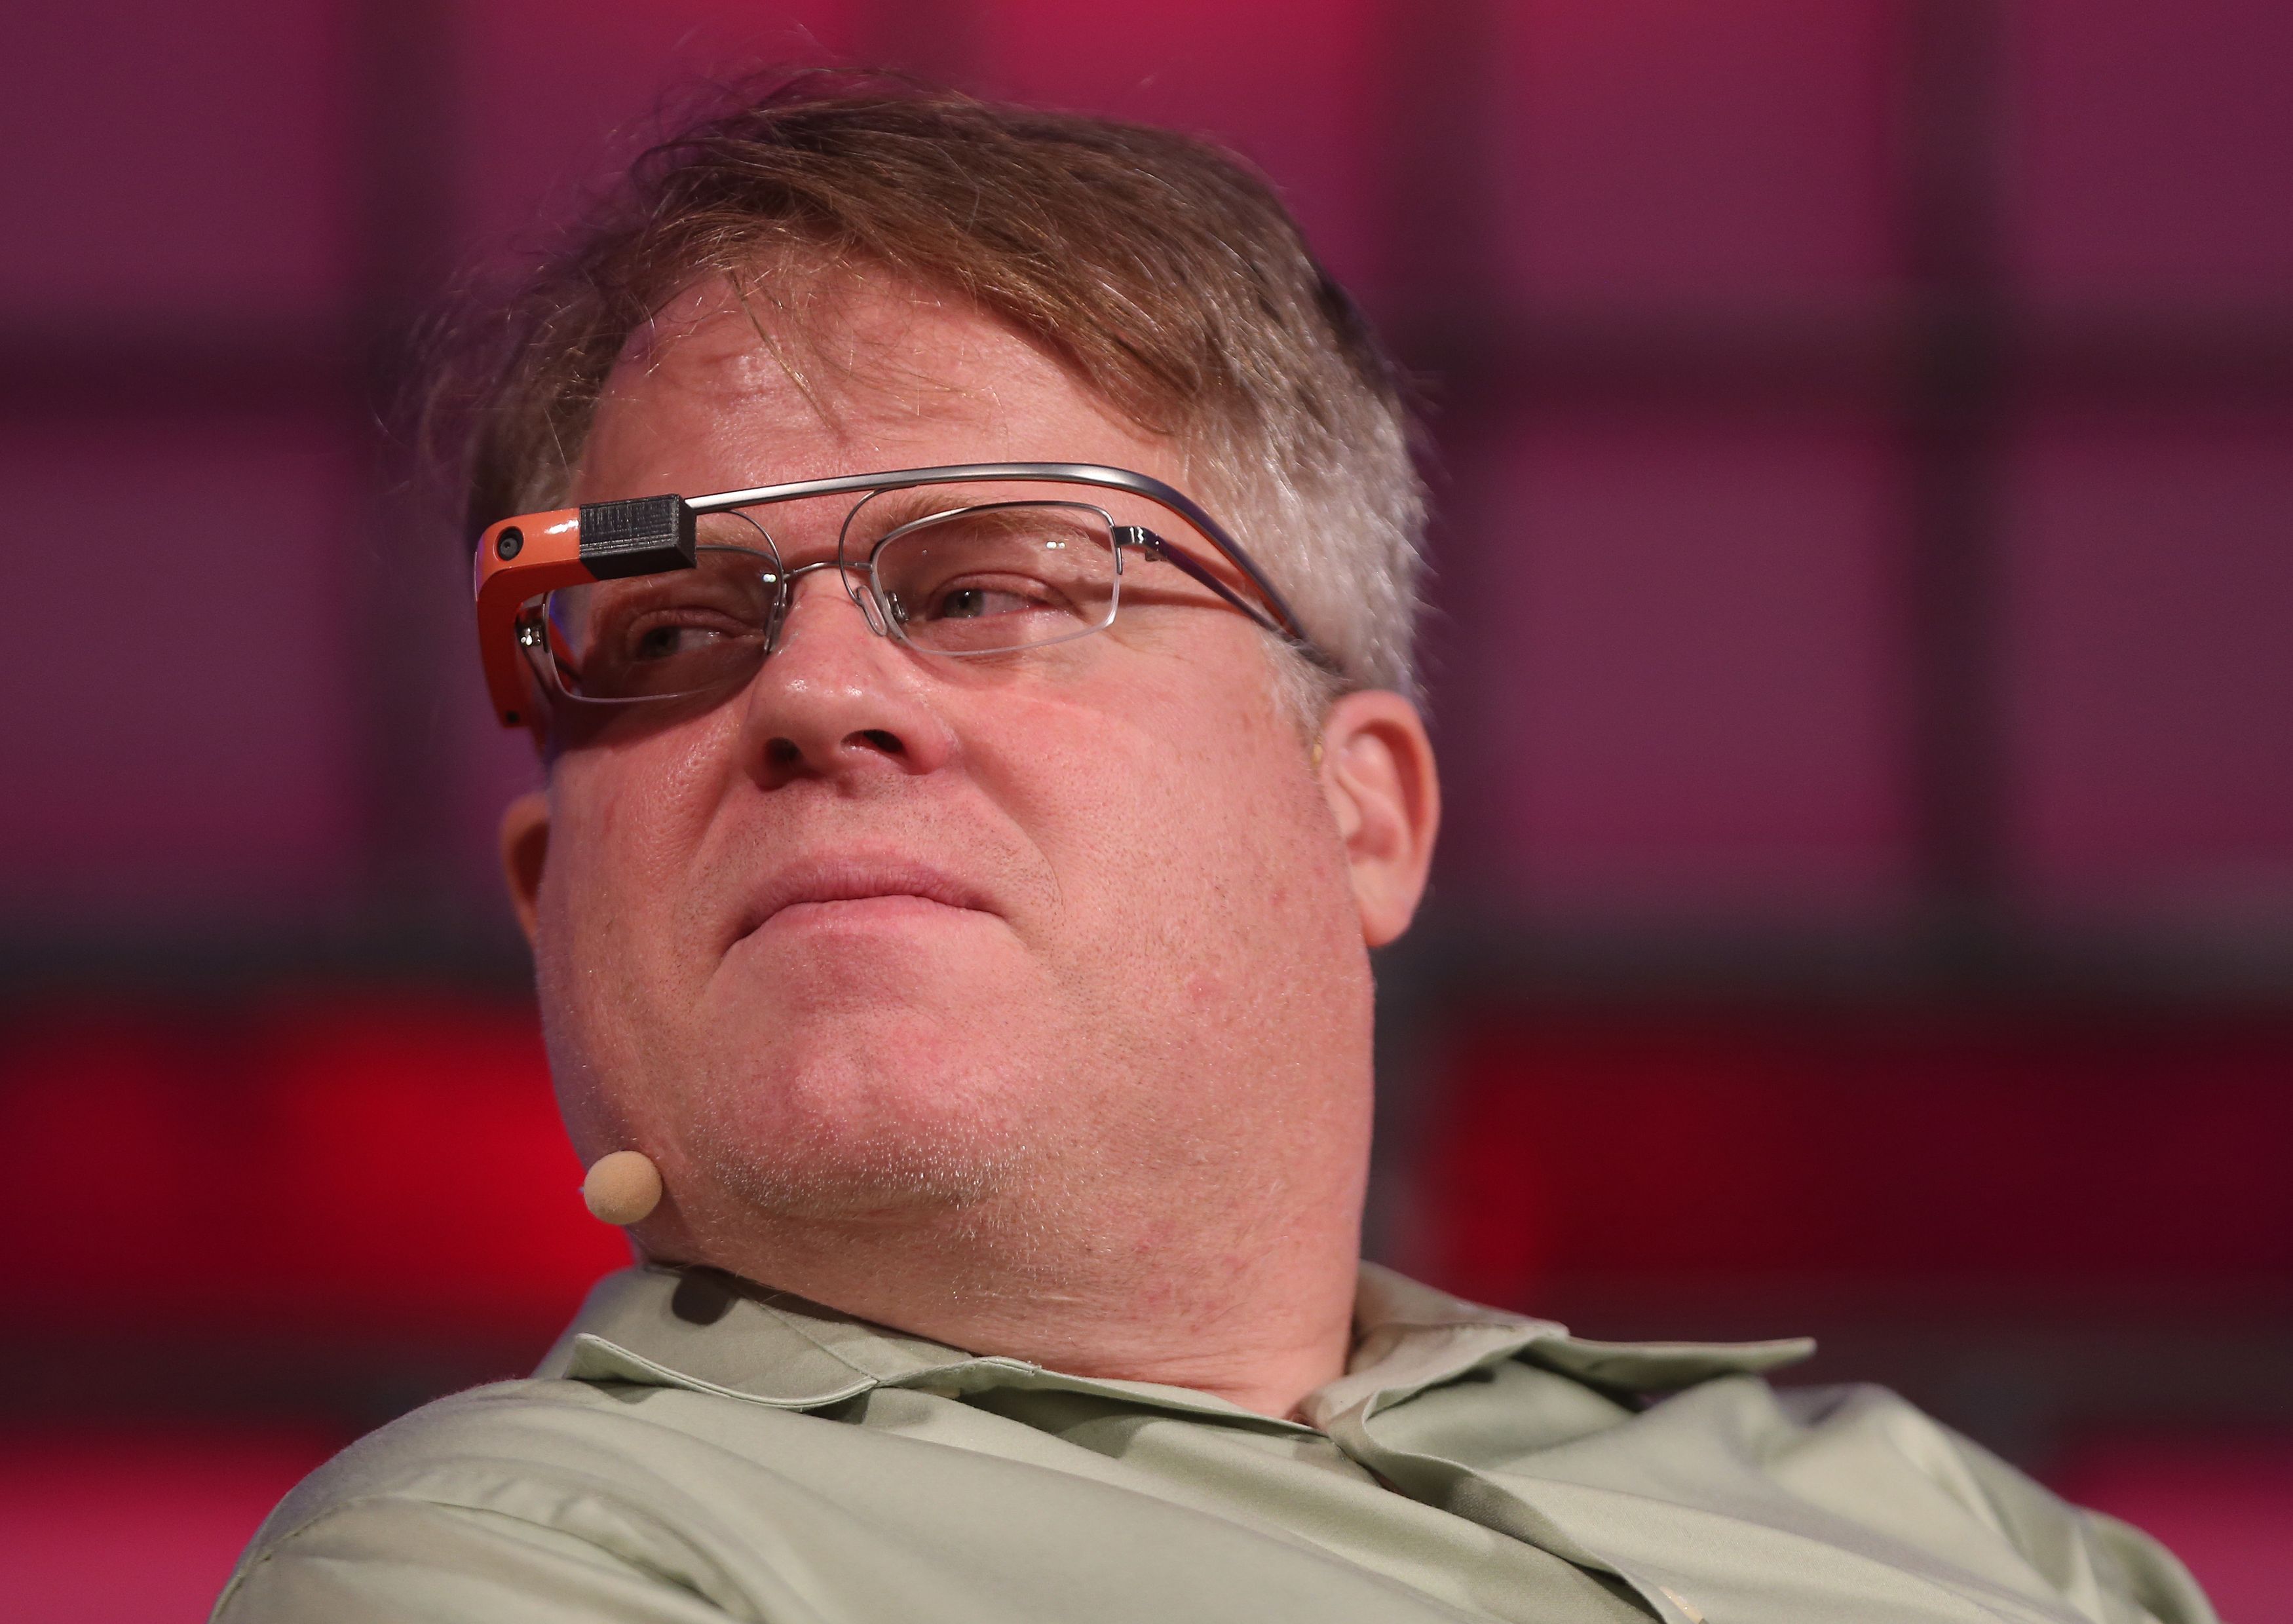 Tech blogger Robert Scoble at the Dublin web summit being held at the RDS in Dublin. (Niall Carson—PA Images/Getty Images)